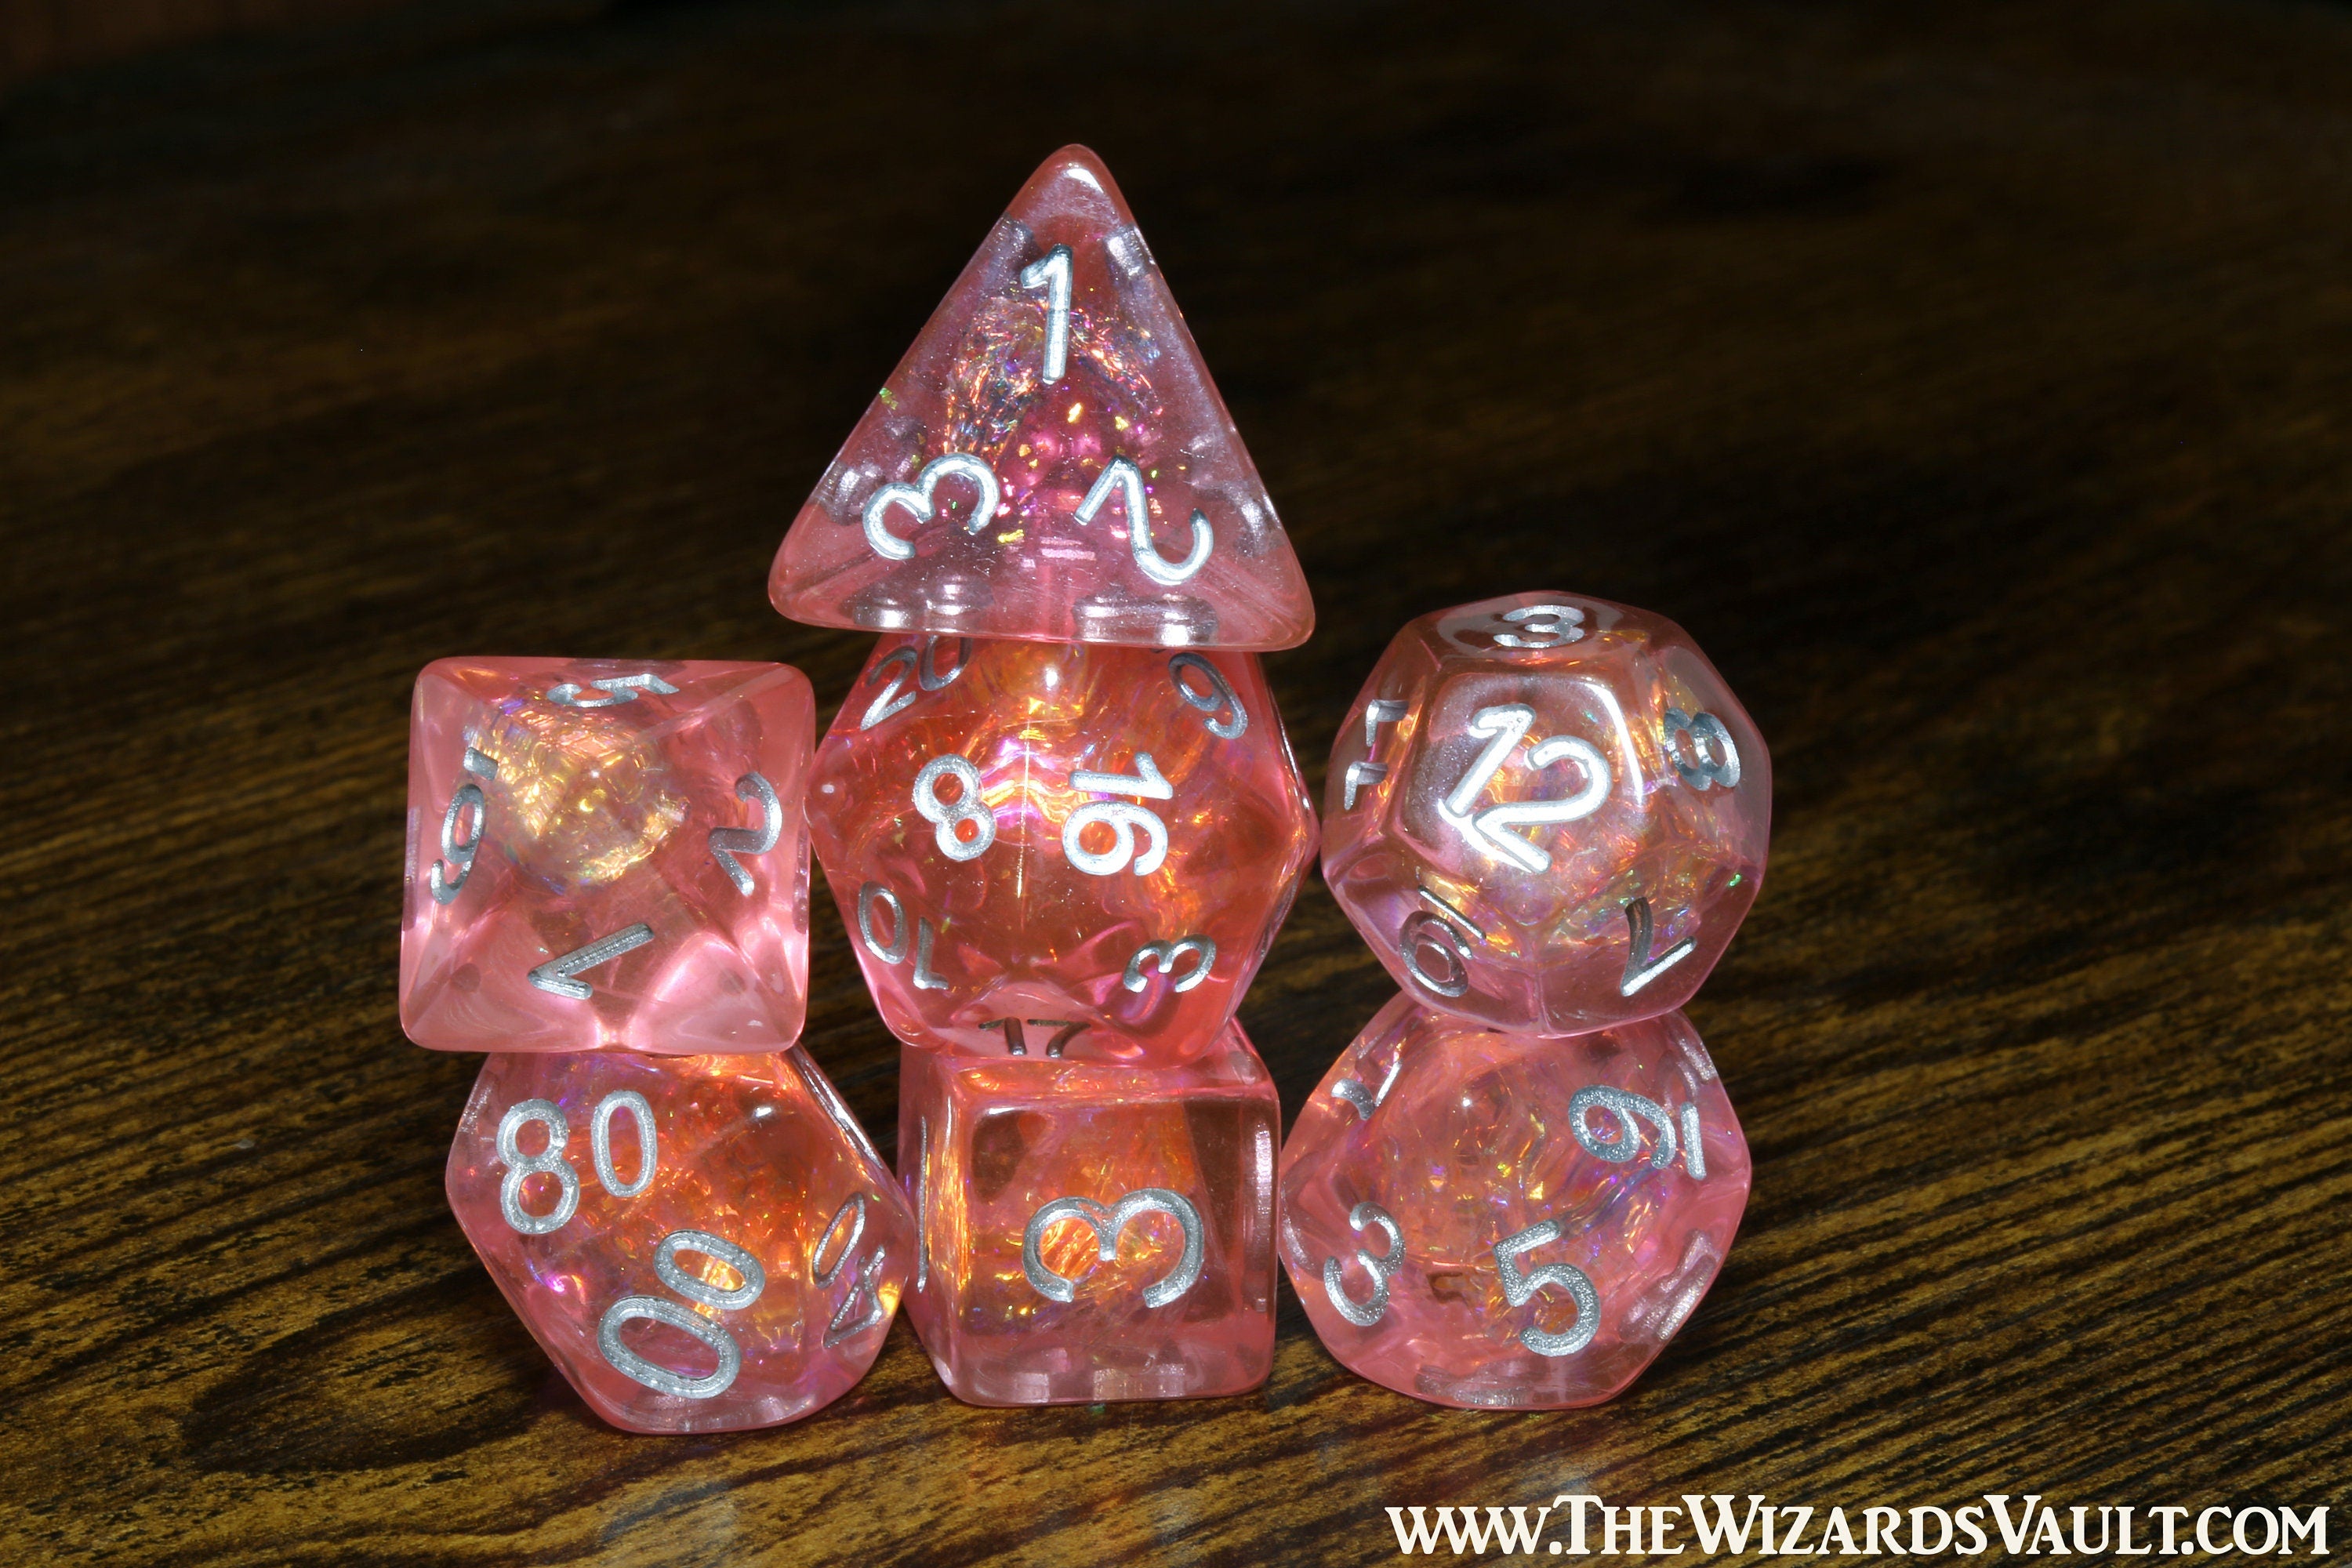 Fire Burst dice set with Holographic foil inclusions DND Dice, Transparent red orange coral pink , Role Playing games Dice storage, D&D - The Wizard's Vault